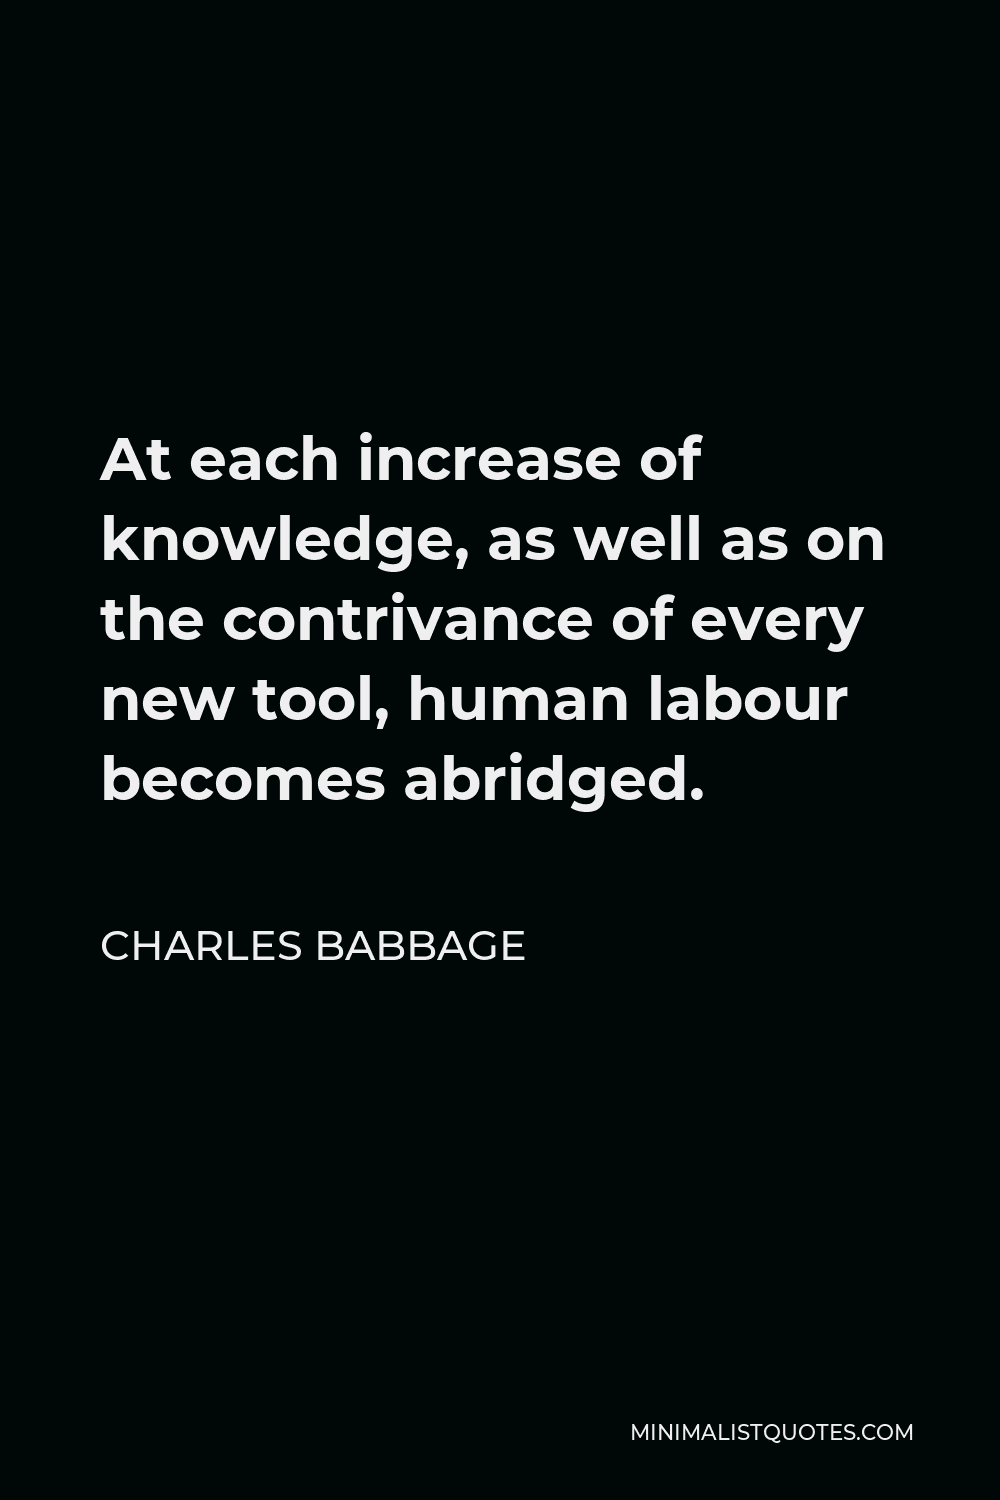 Charles Babbage Quote - At each increase of knowledge, as well as on the contrivance of every new tool, human labour becomes abridged.